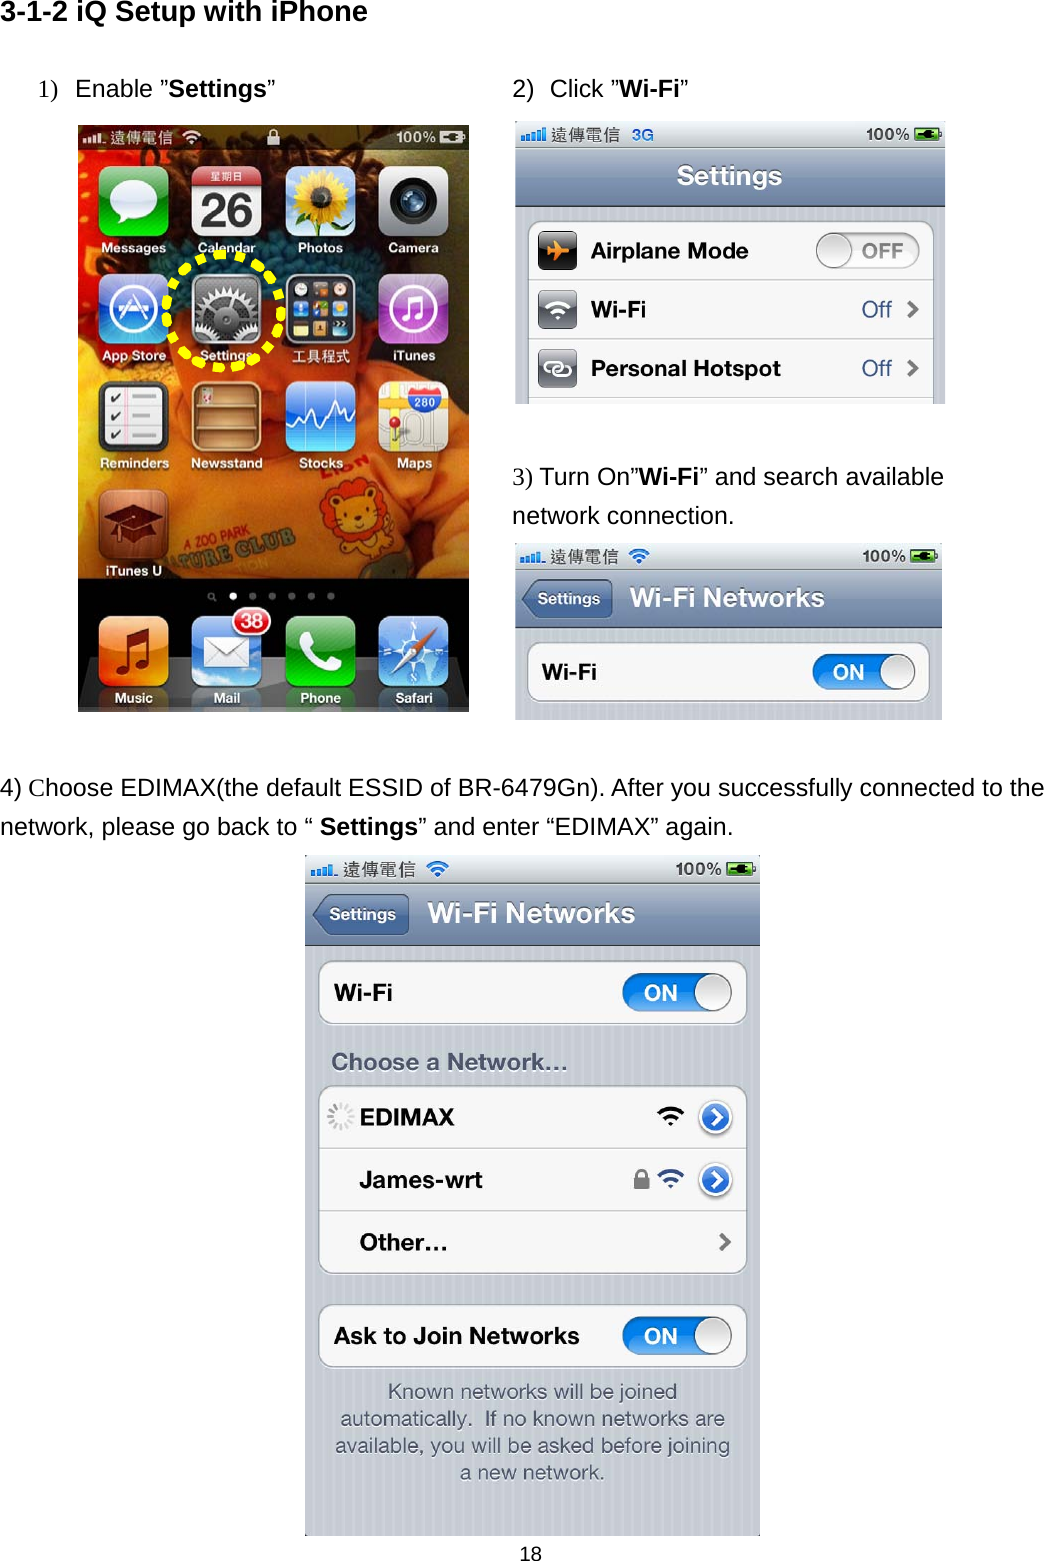 18  3-1-2 iQ Setup with iPhone 1) Enable ”Settings”  2) Click ”Wi-Fi”   3) Turn On”Wi-Fi” and search available network connection.   4) Choose EDIMAX(the default ESSID of BR-6479Gn). After you successfully connected to the network, please go back to “ Settings” and enter “EDIMAX” again.    